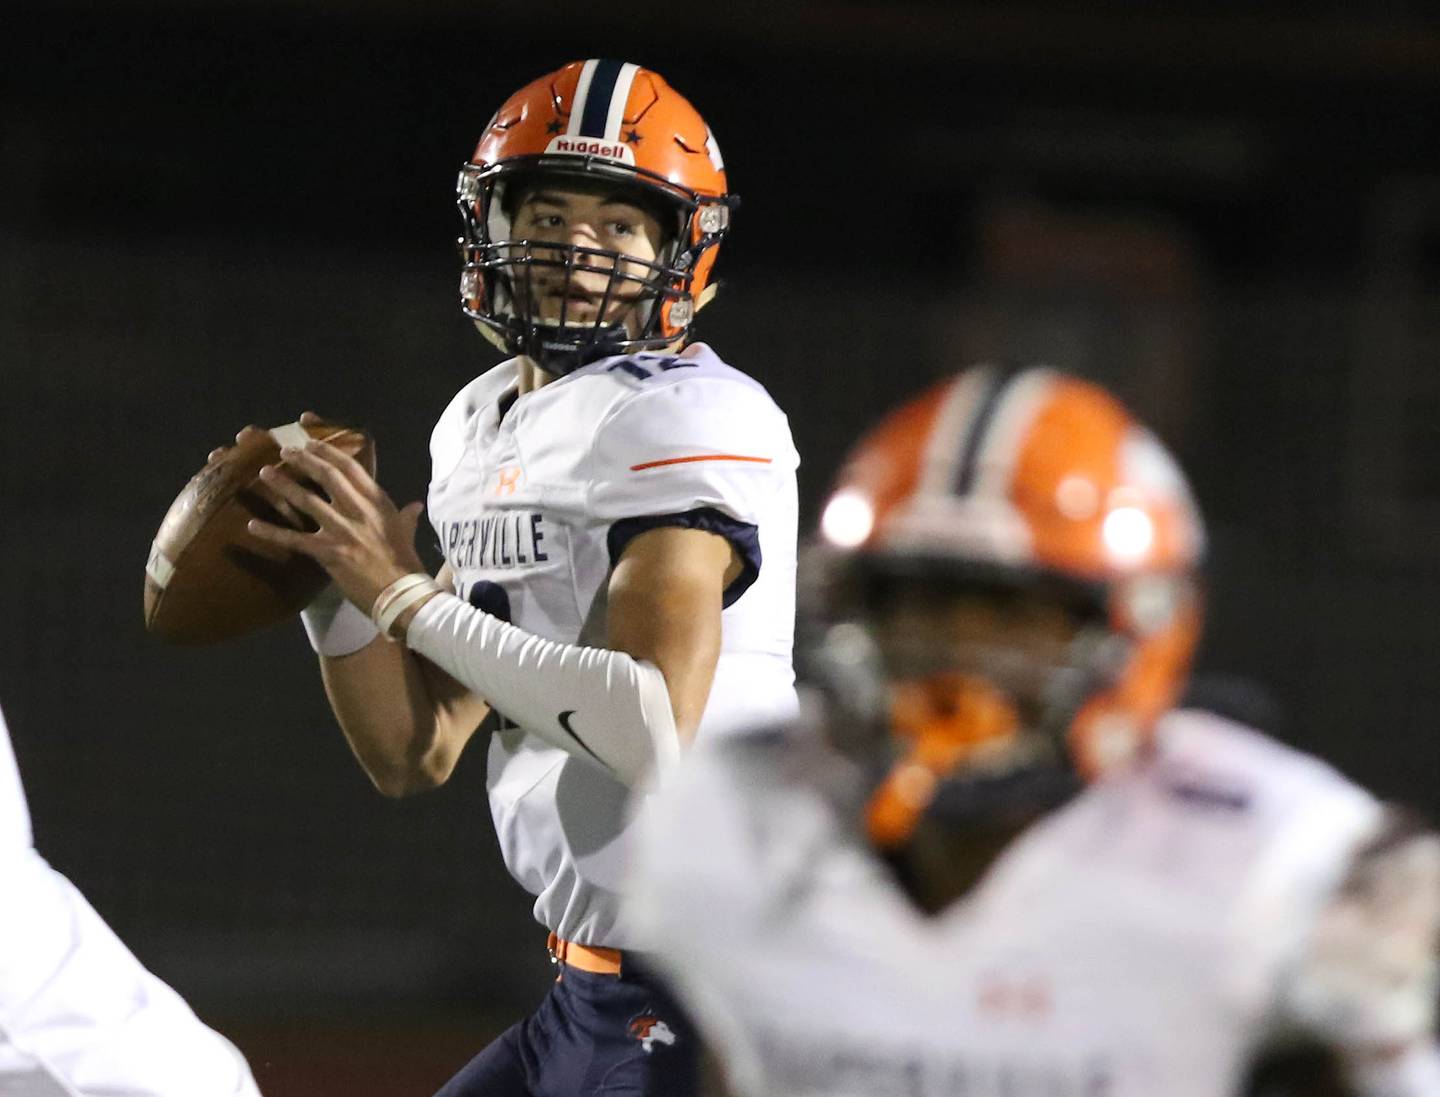 Naperville North quarterback Aidan Gray looks for a receiver during their game Friday Sep. 25, 2021 at DeKalb High School.